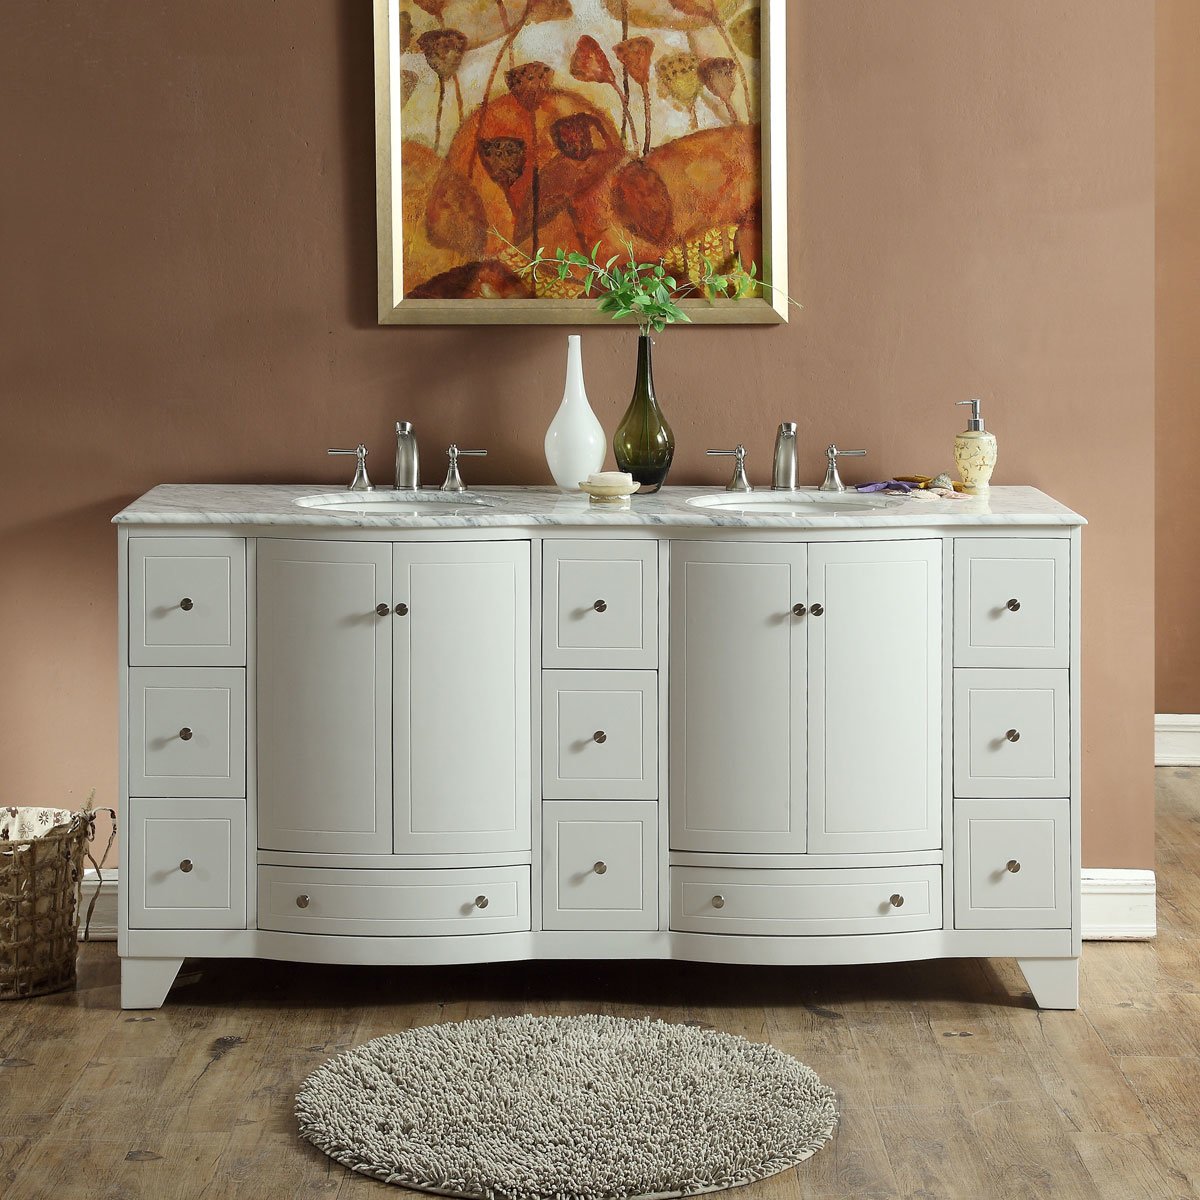 72 inch Double Sink Contemporary Bathroom Vanity White Finish Marble Top